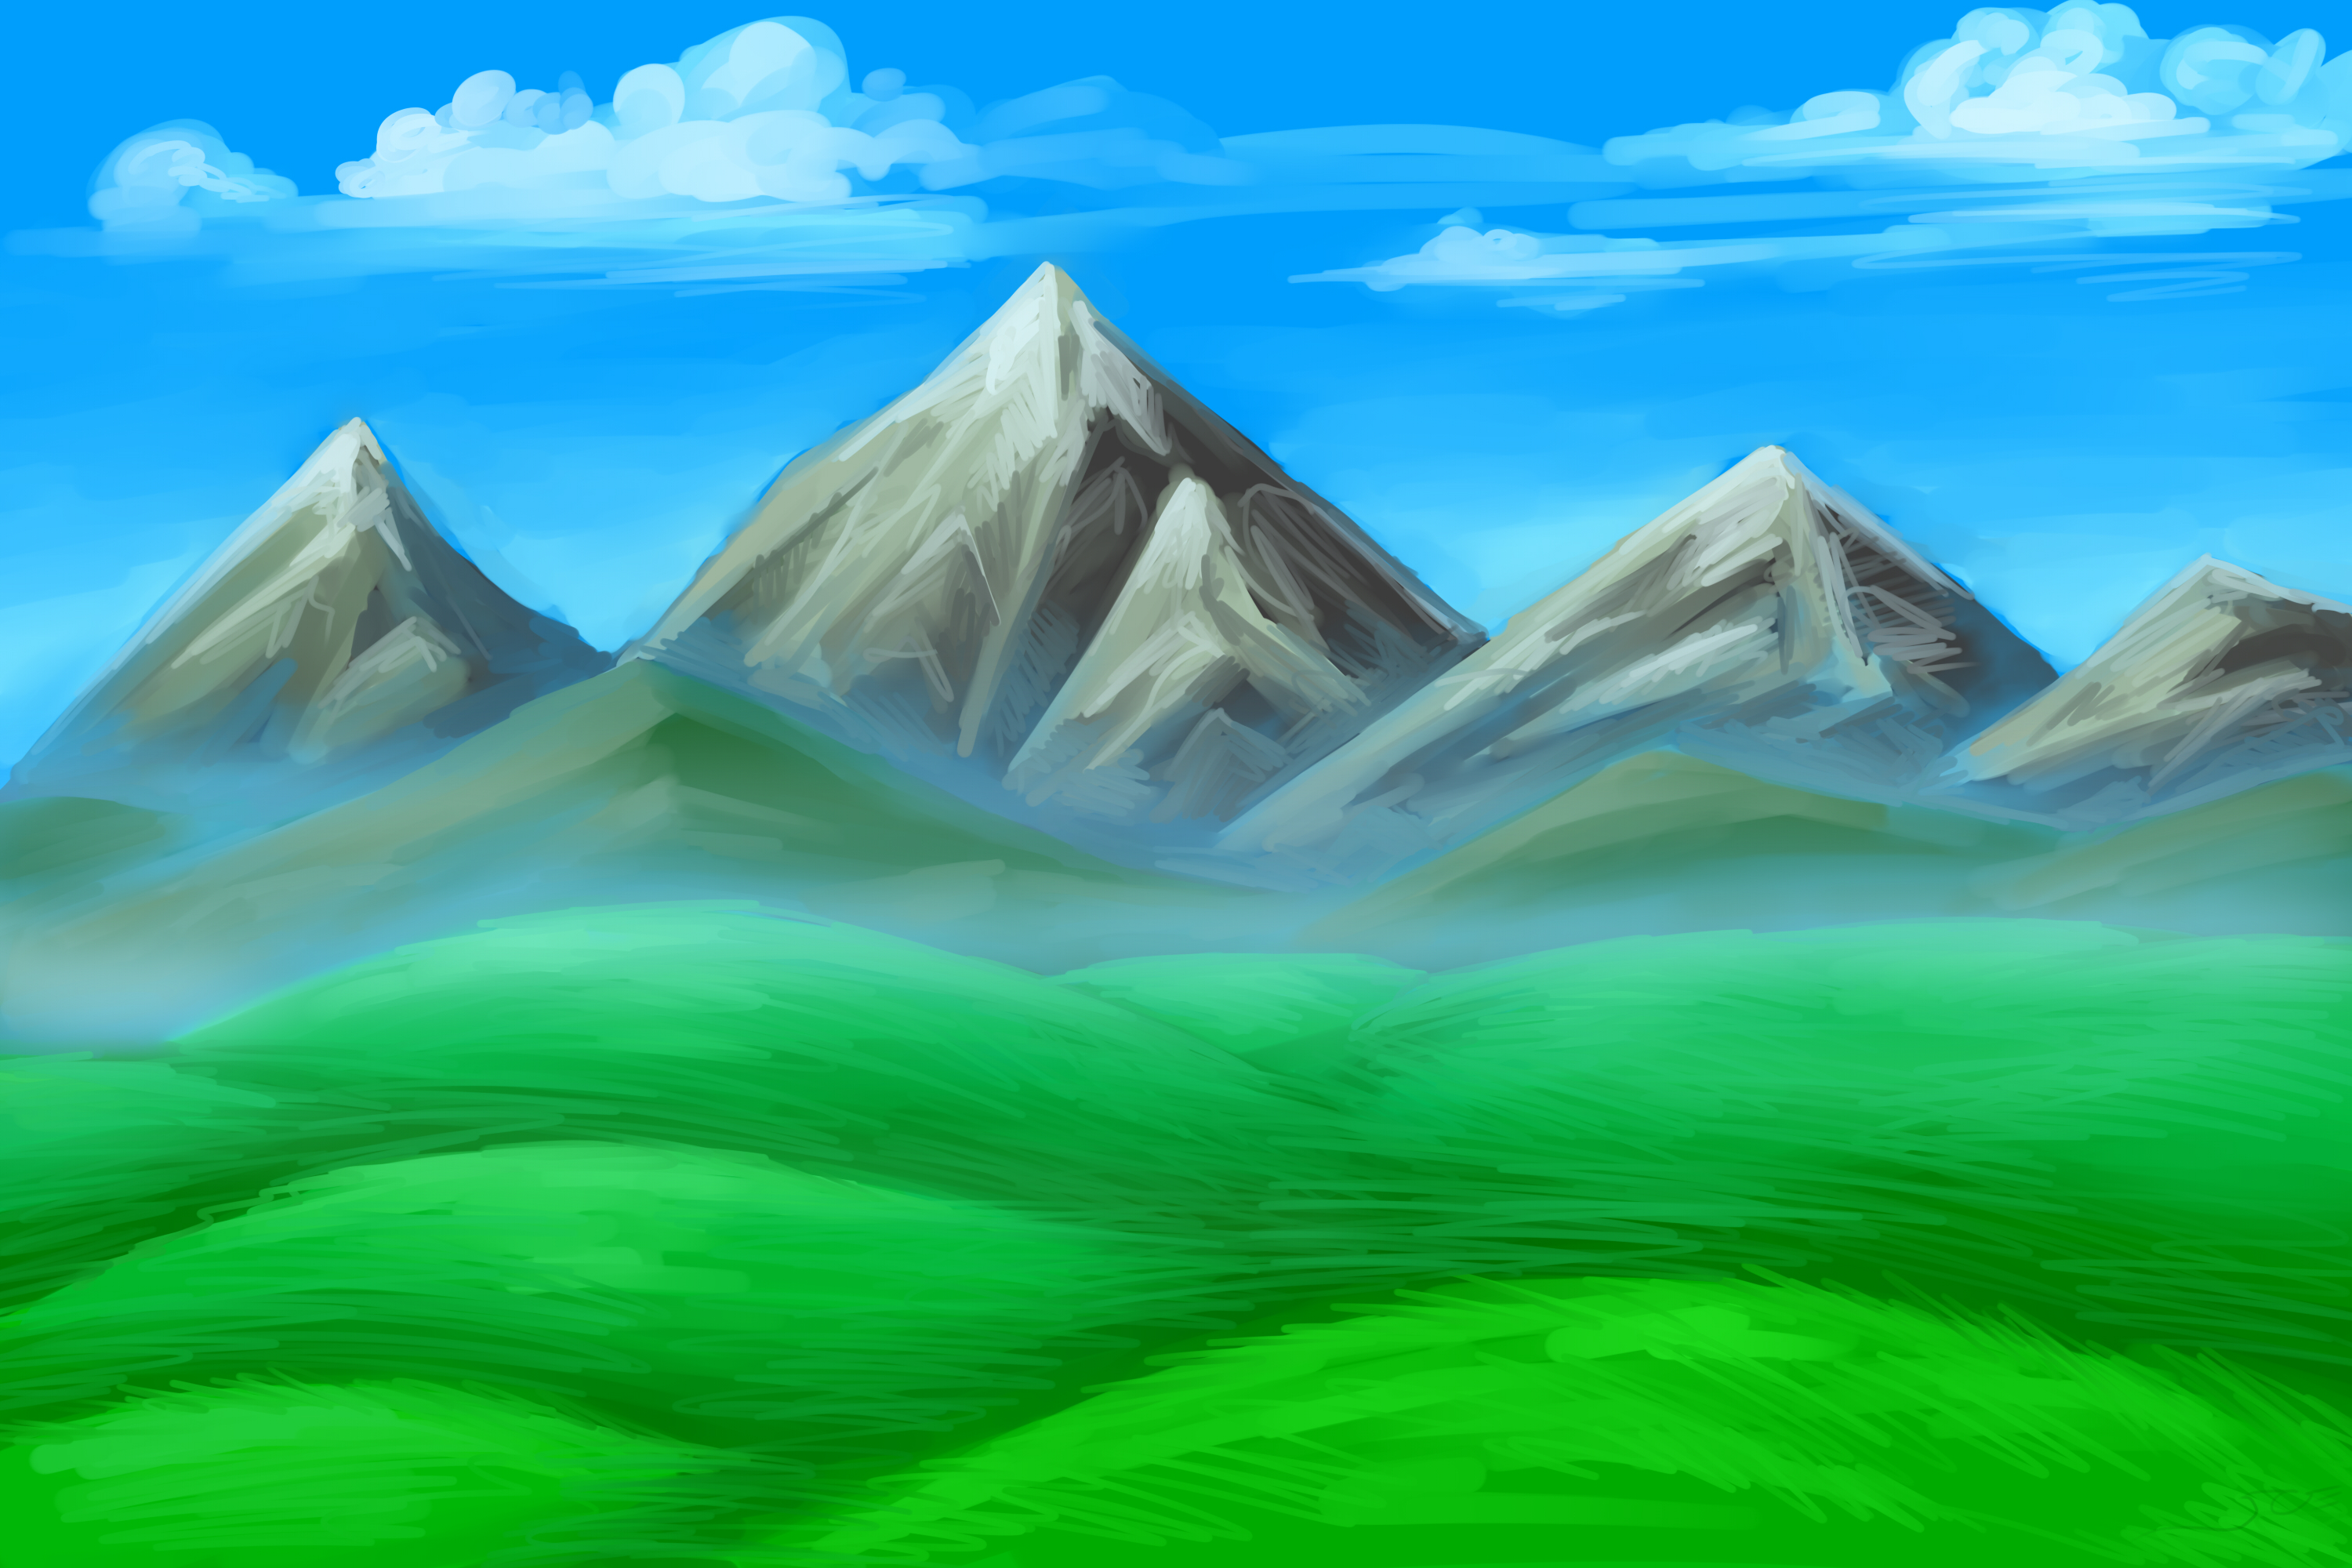 How to Draw Mountains · Art Projects for Kids - lavernonews